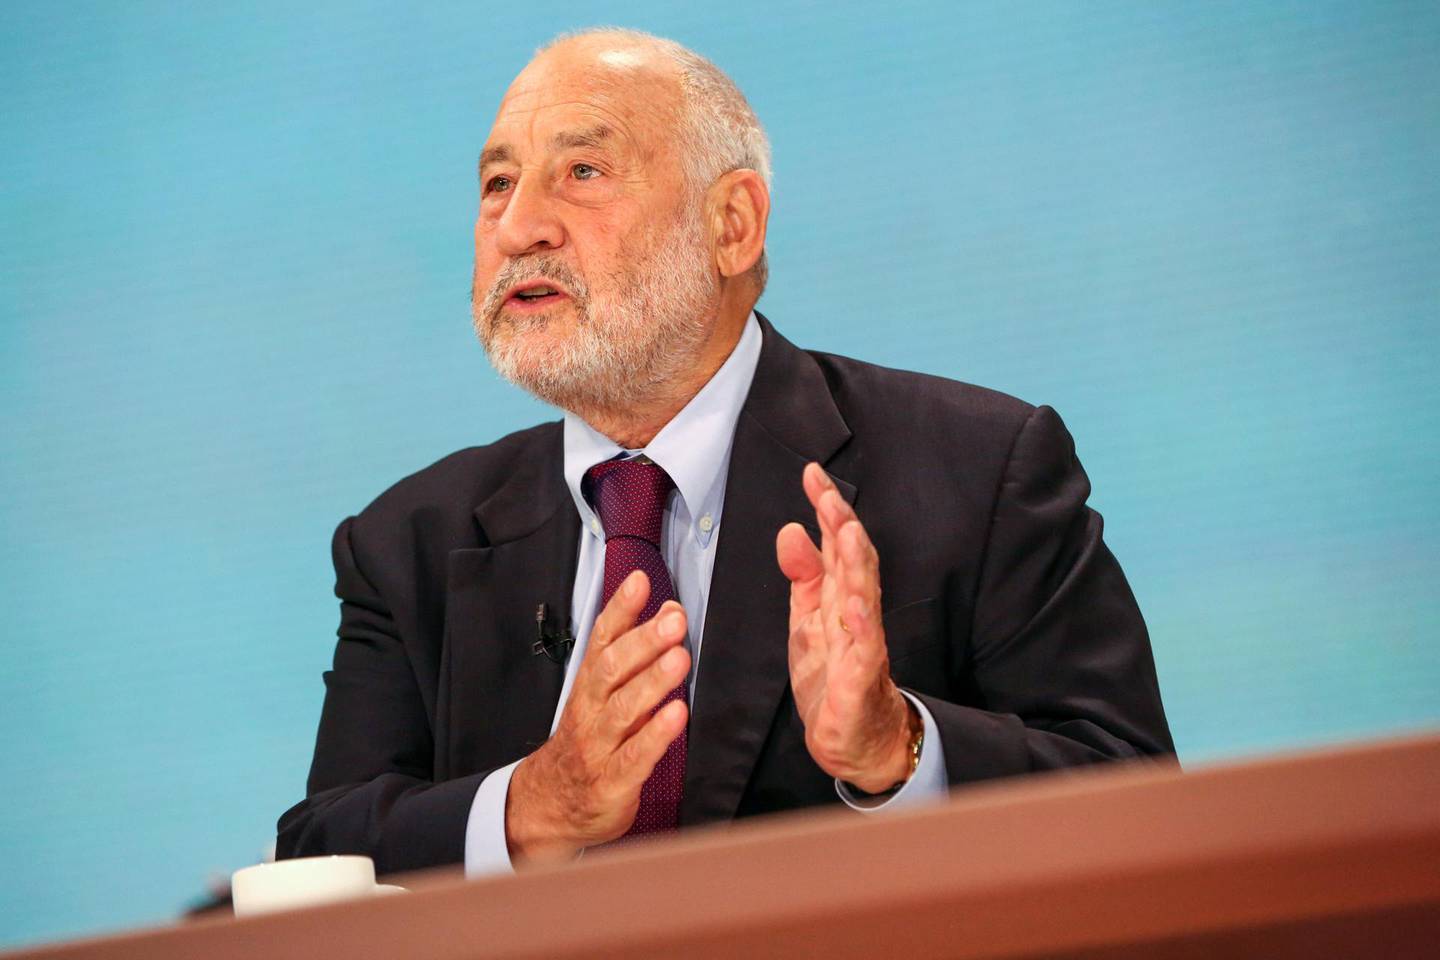 Joseph Stiglitz, economics professor at Columbia University, speaks during a Bloomberg Television interview in New York, U.S., on Thursday, Aug. 18, 2016. Stiglitz discussed his new book The Euro: How a Common Currency Threatens the Future of Europe. Photographer: Christopher Goodney/Bloomberg